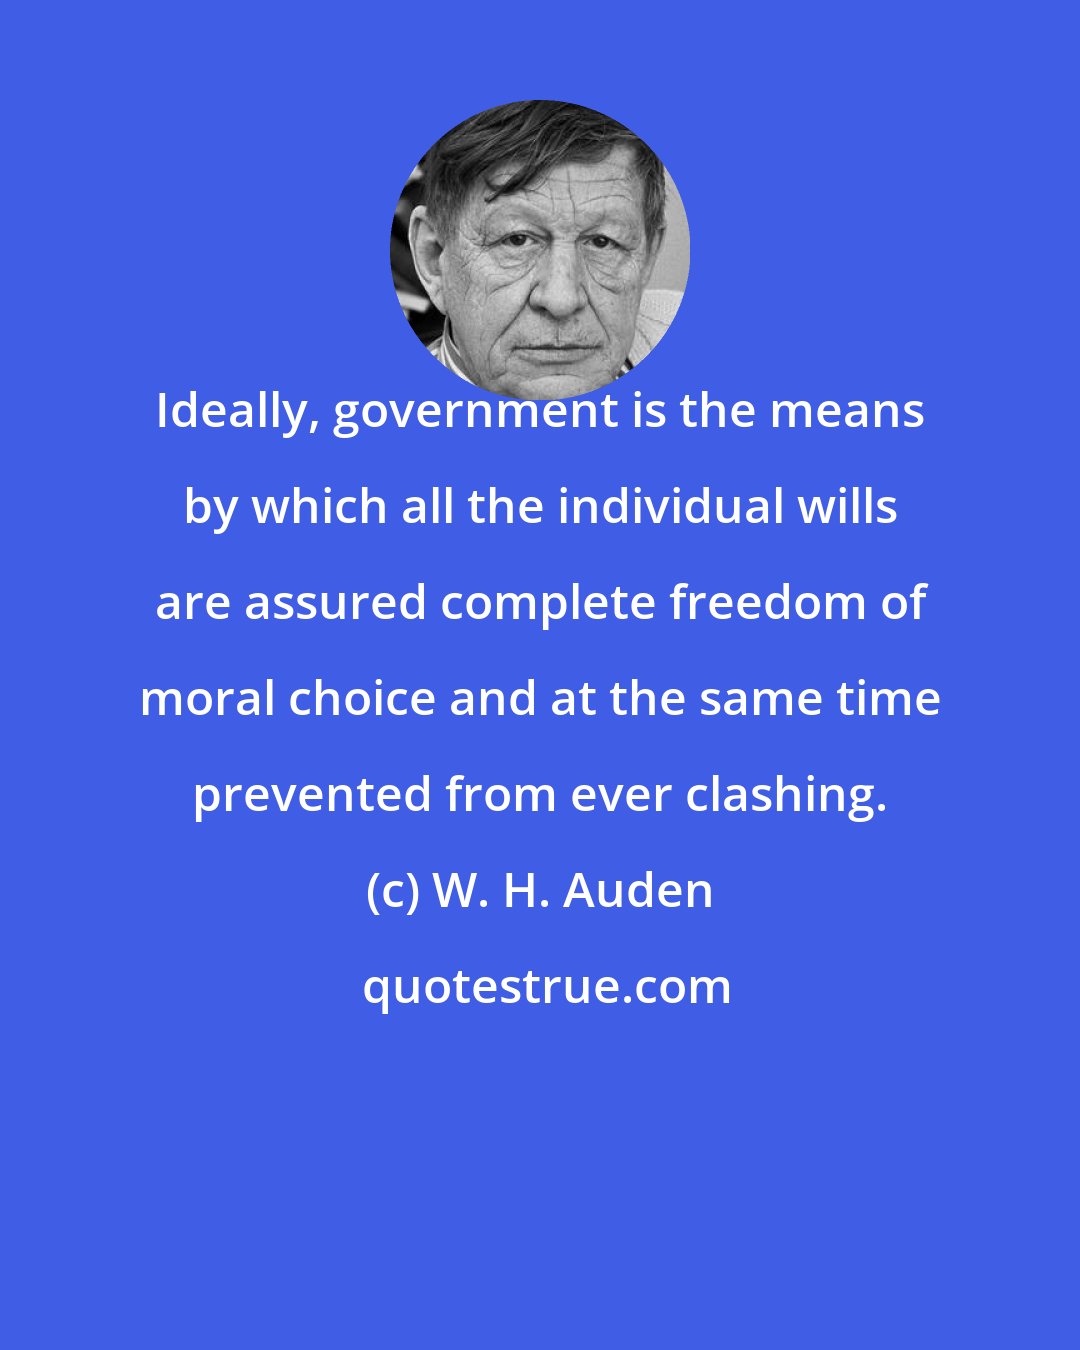 W. H. Auden: Ideally, government is the means by which all the individual wills are assured complete freedom of moral choice and at the same time prevented from ever clashing.